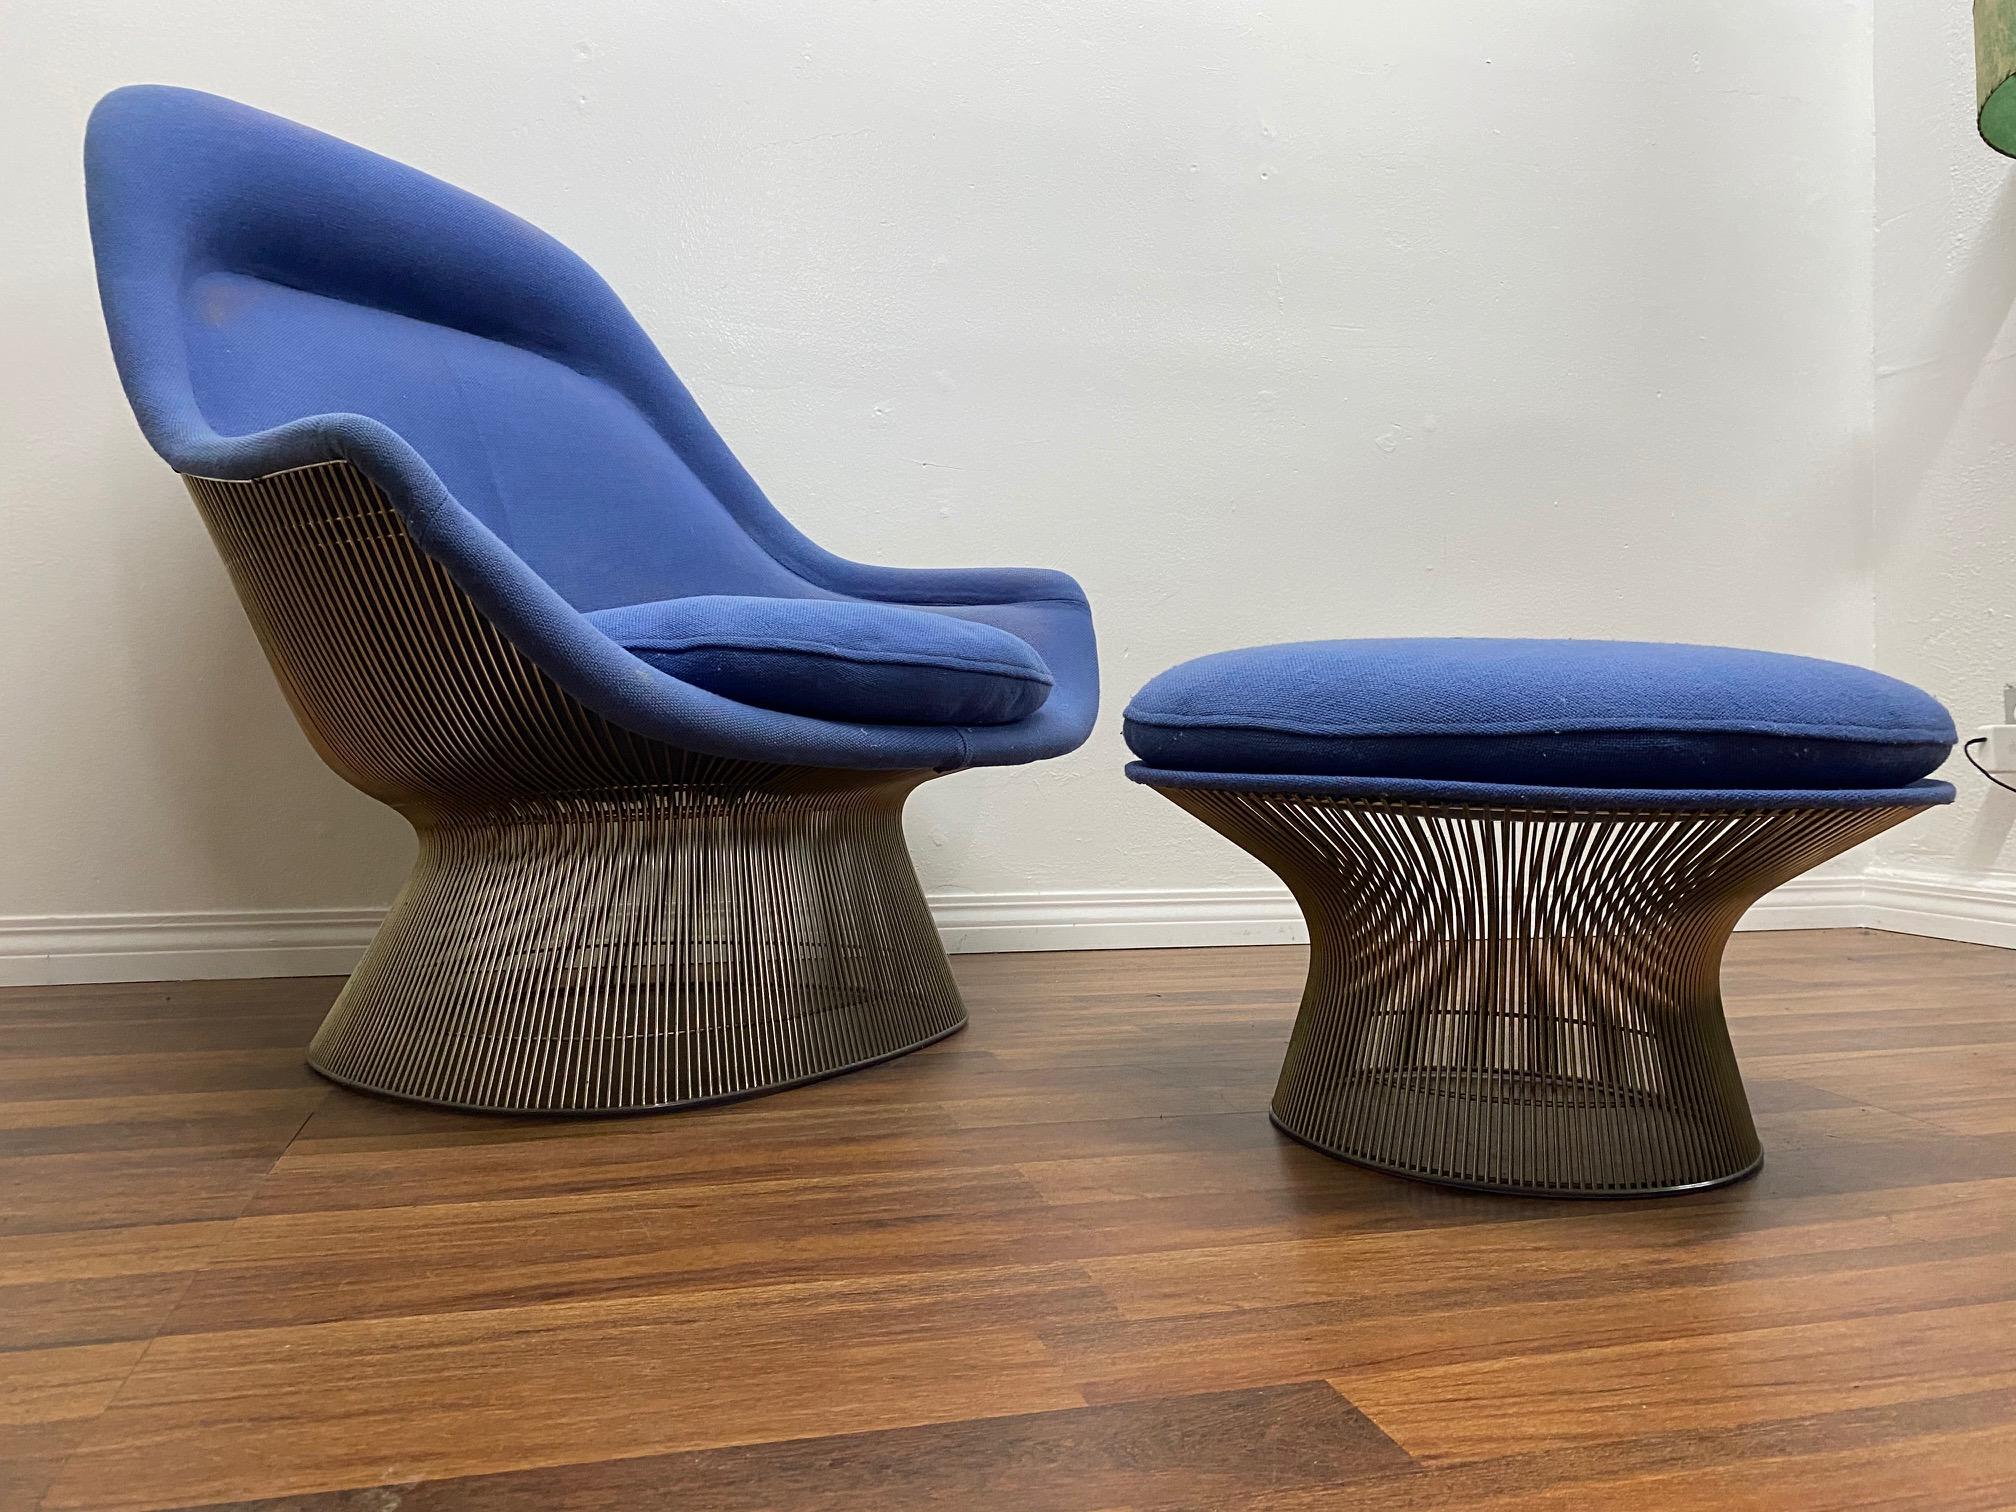 A 'model 1705' lounge chair with ottoman. Design by Warren Platner for Knoll International. Made of nickeled steel. Original tweed fabric, needs upholstery. This iconic easy chair by Warren Platner is created by welding curved steel rods to circular